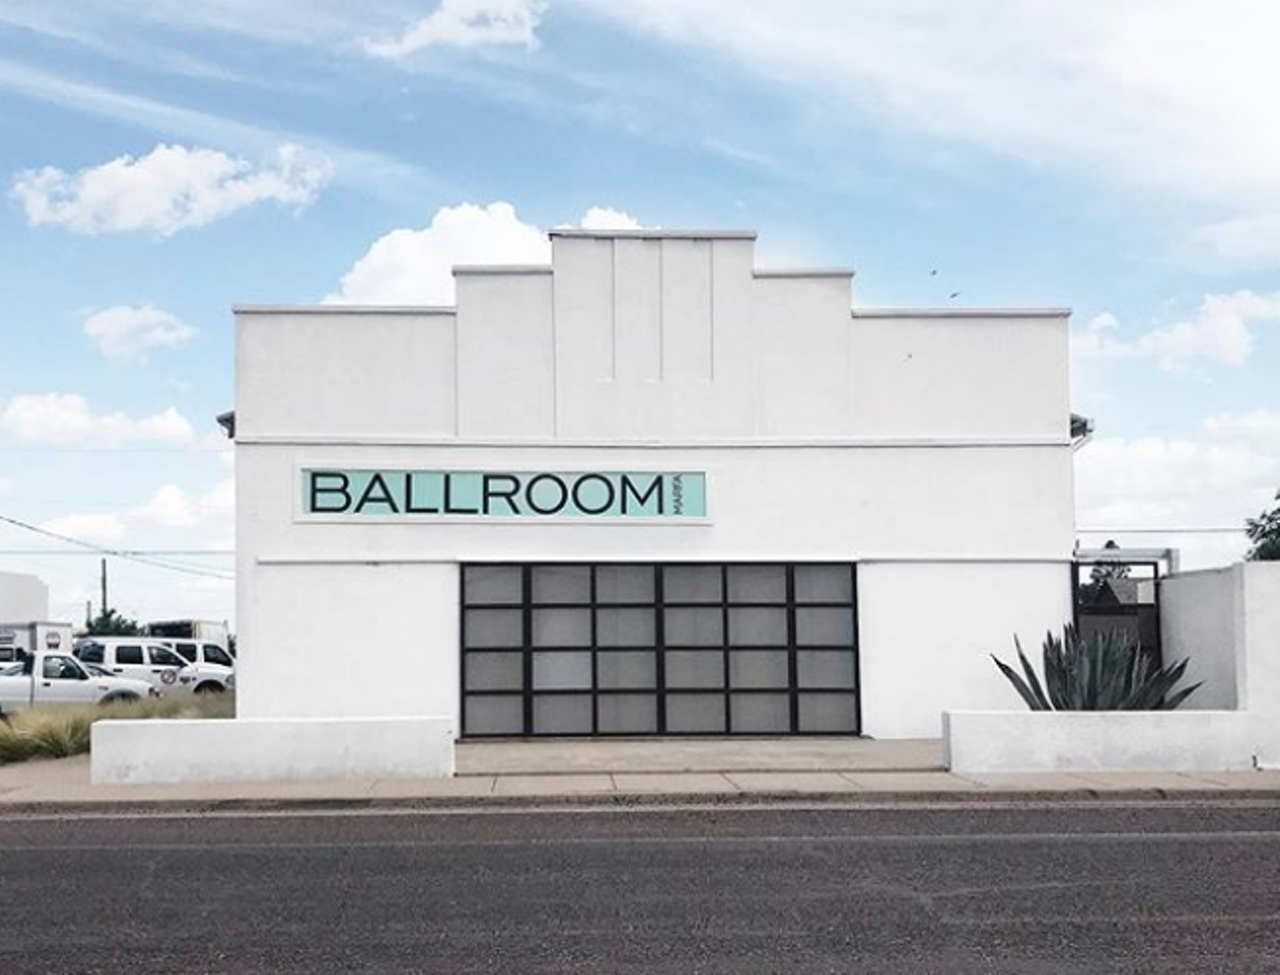 Ballroom Marfa
108 E San Antonio St, Marfa, (432) 729-3600, ballroommarfa.org
There’s lots to see and do in Marfa – checking out this music venue among them. A spot for visual art and film as well, Ballroom Marfa host live music acts on occasion. Consider it something to do on your next art-filled getaway to Marfa.
Photo via Instagram / barkandbeam